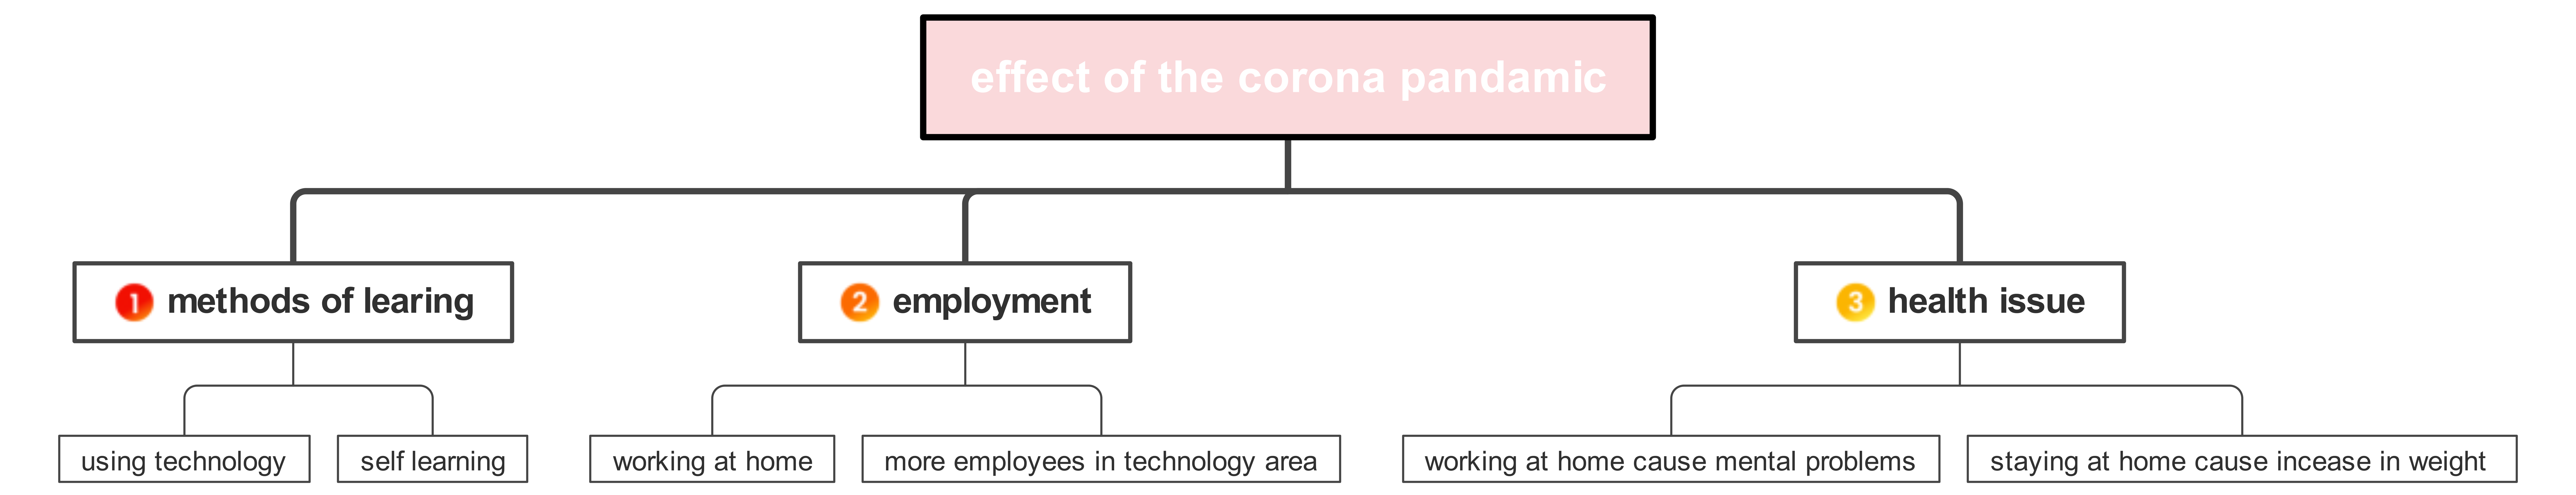 Effects: How the Corona Pandemic Transformed Learning, Employment, and Health Dynamics